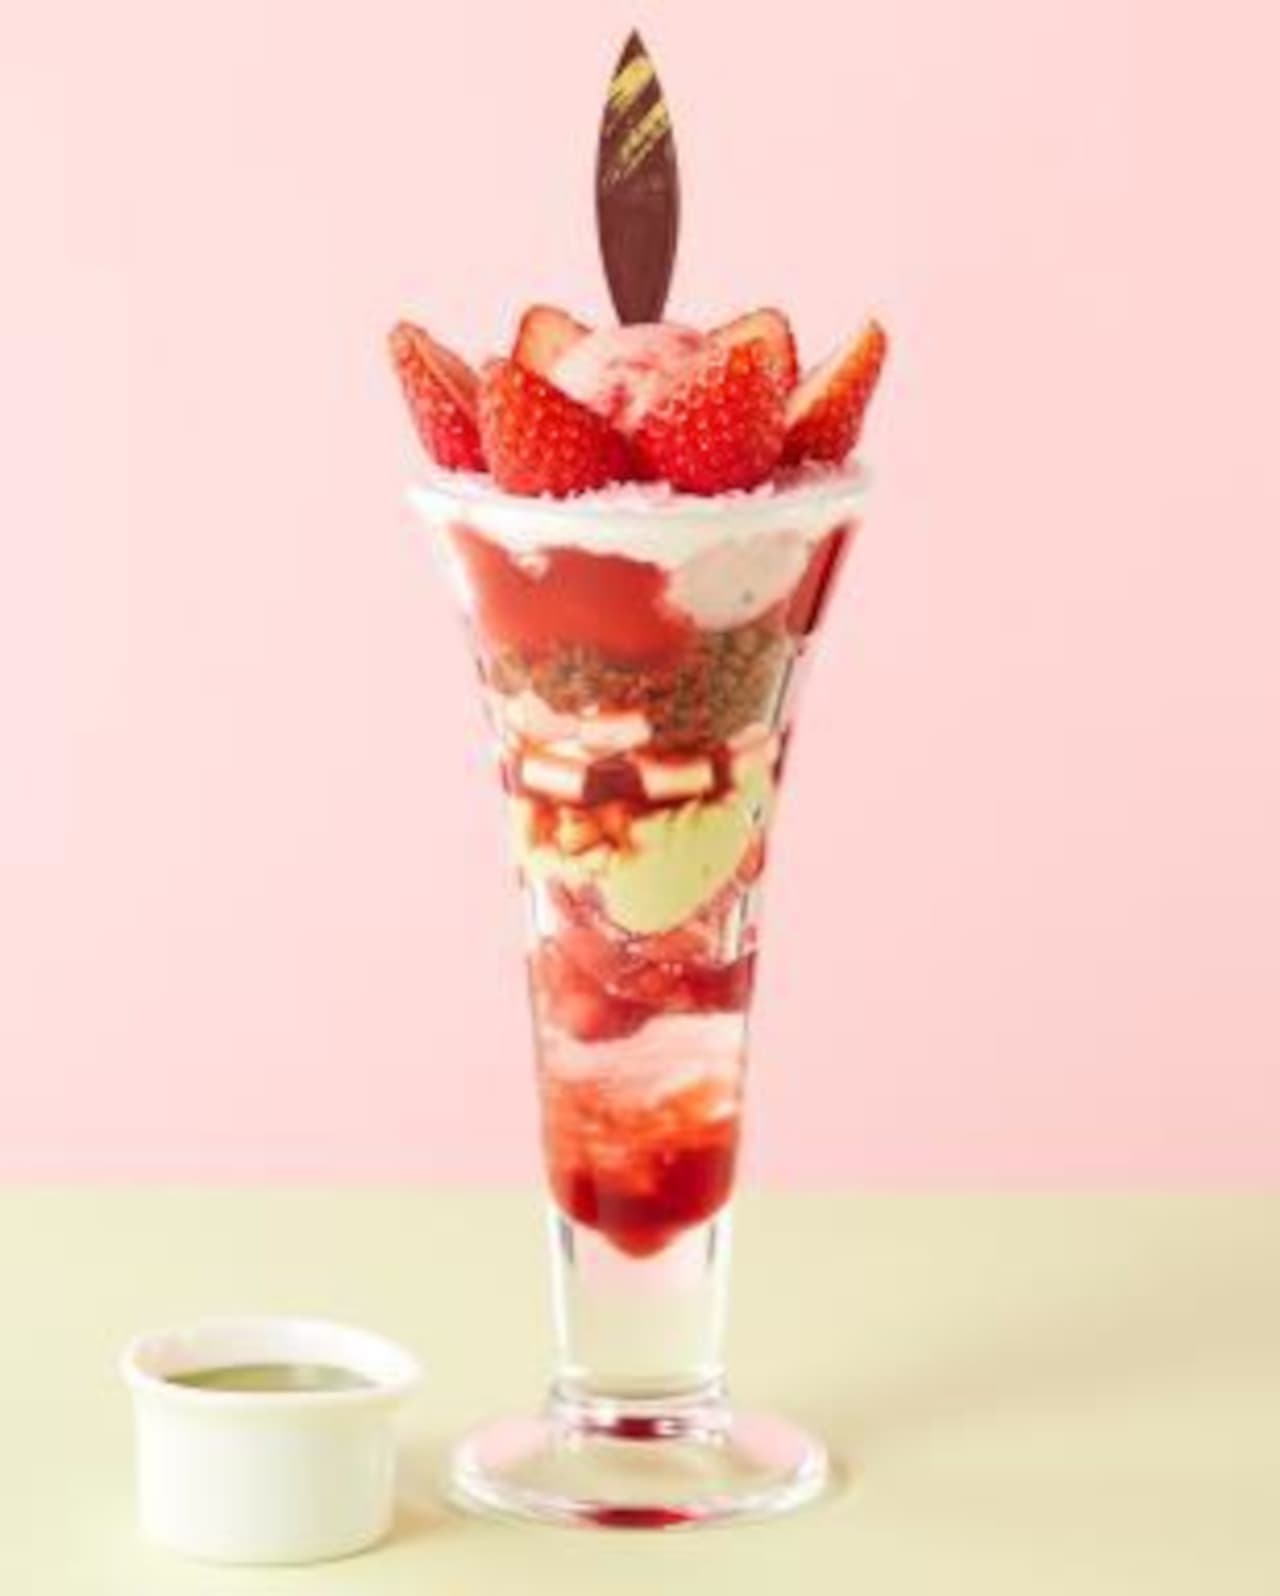 Cocos "Strawberry and Pistachio Blooming Parfait"